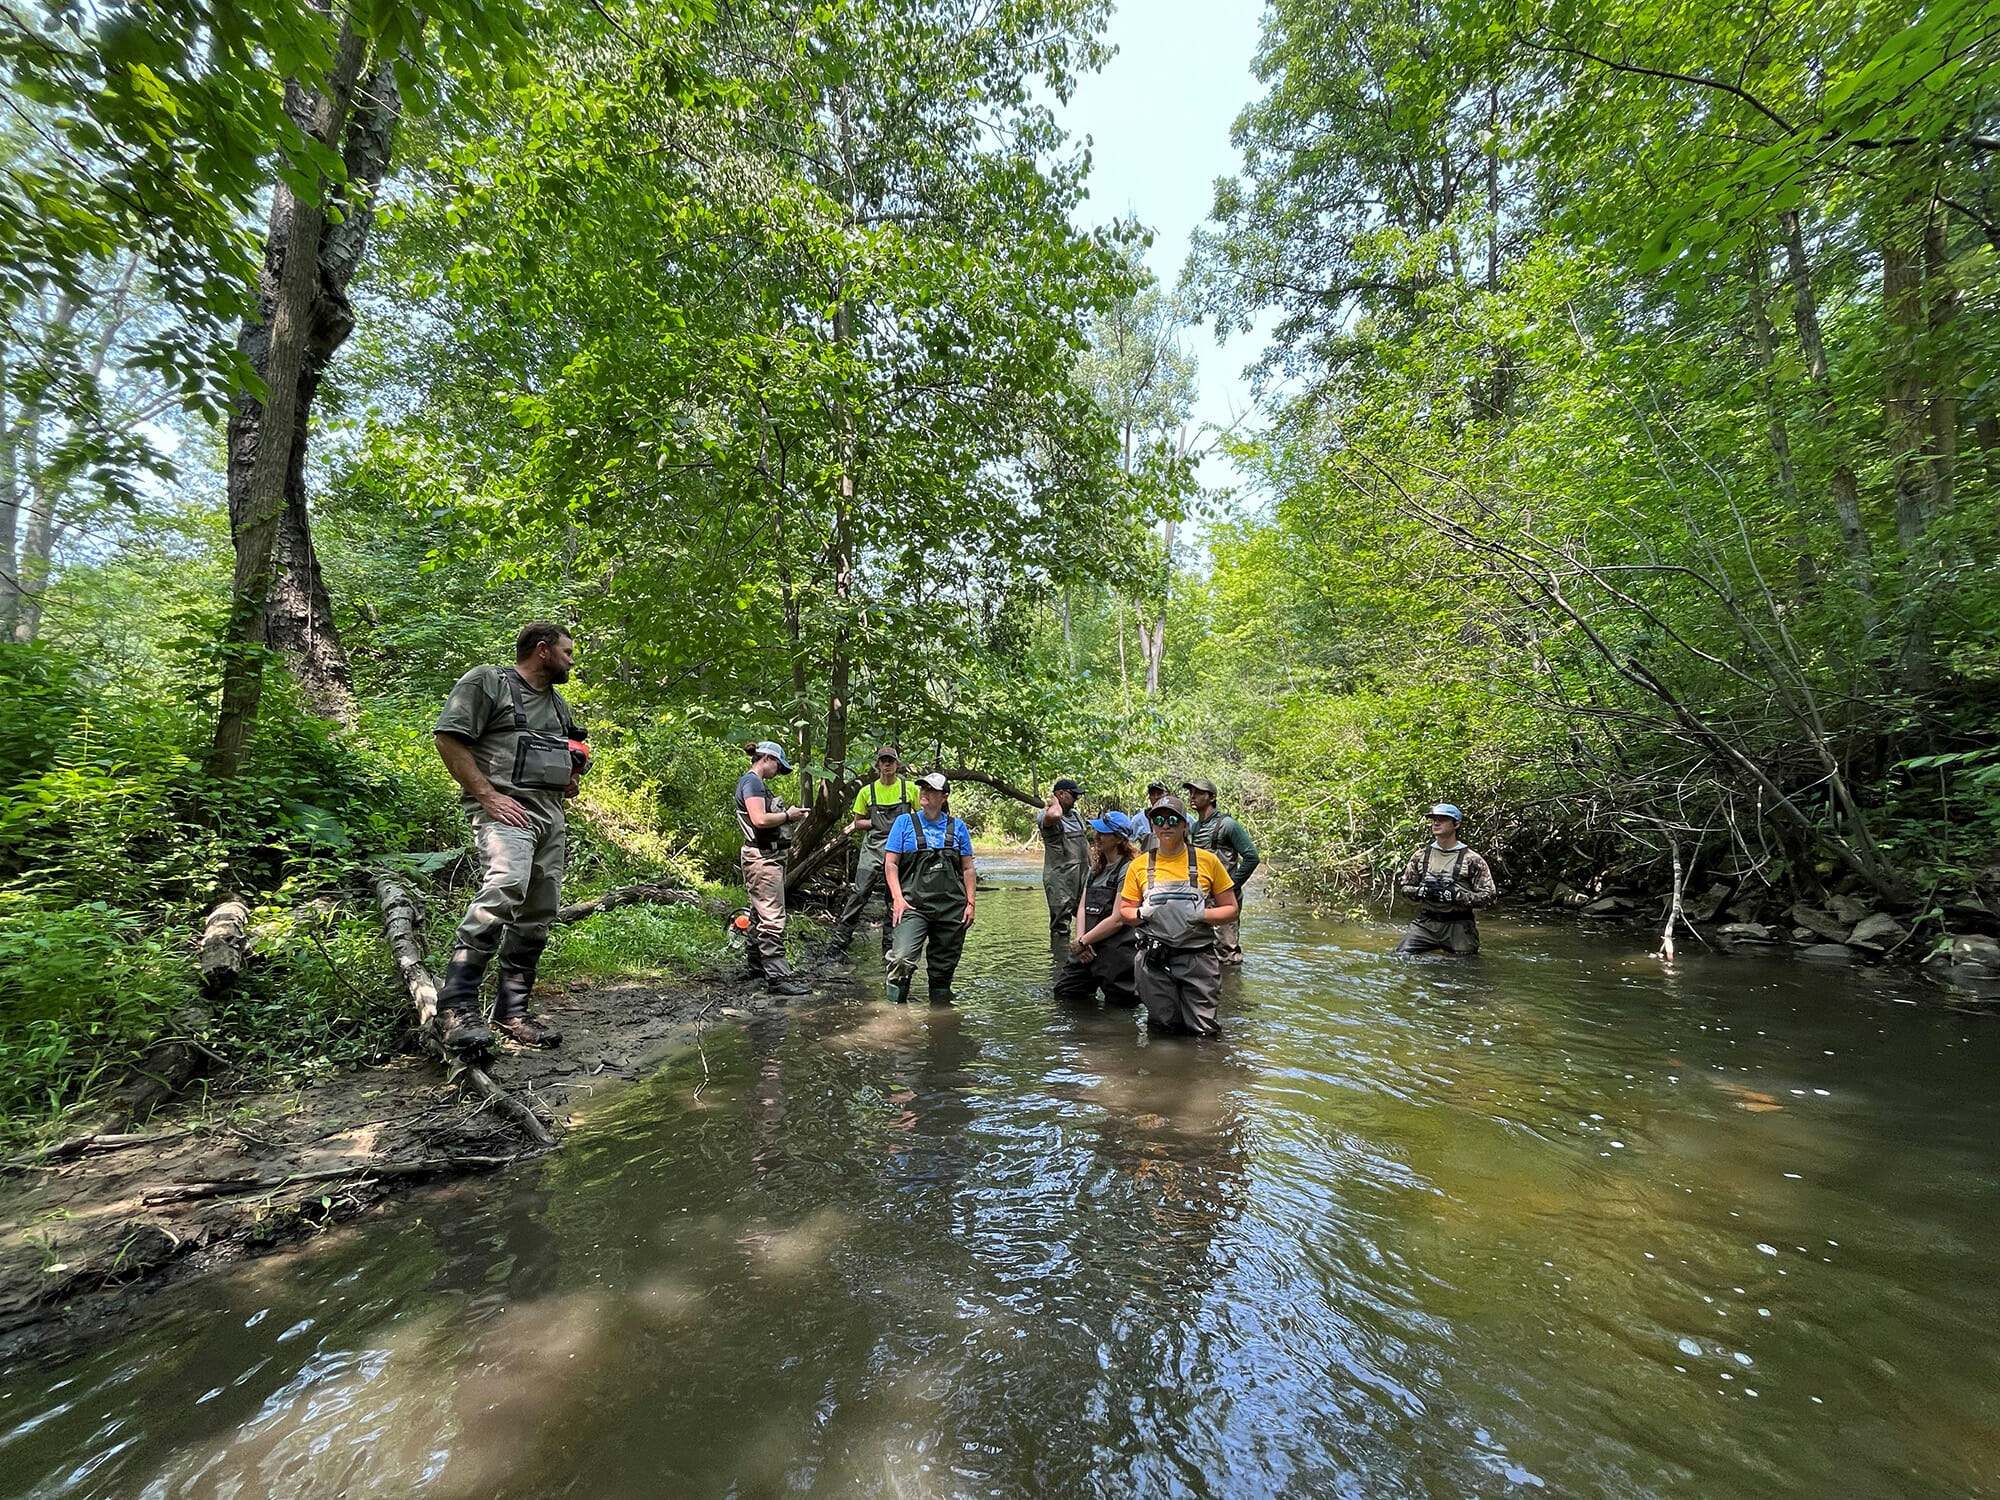 Group of people wearing waders stands in a stream